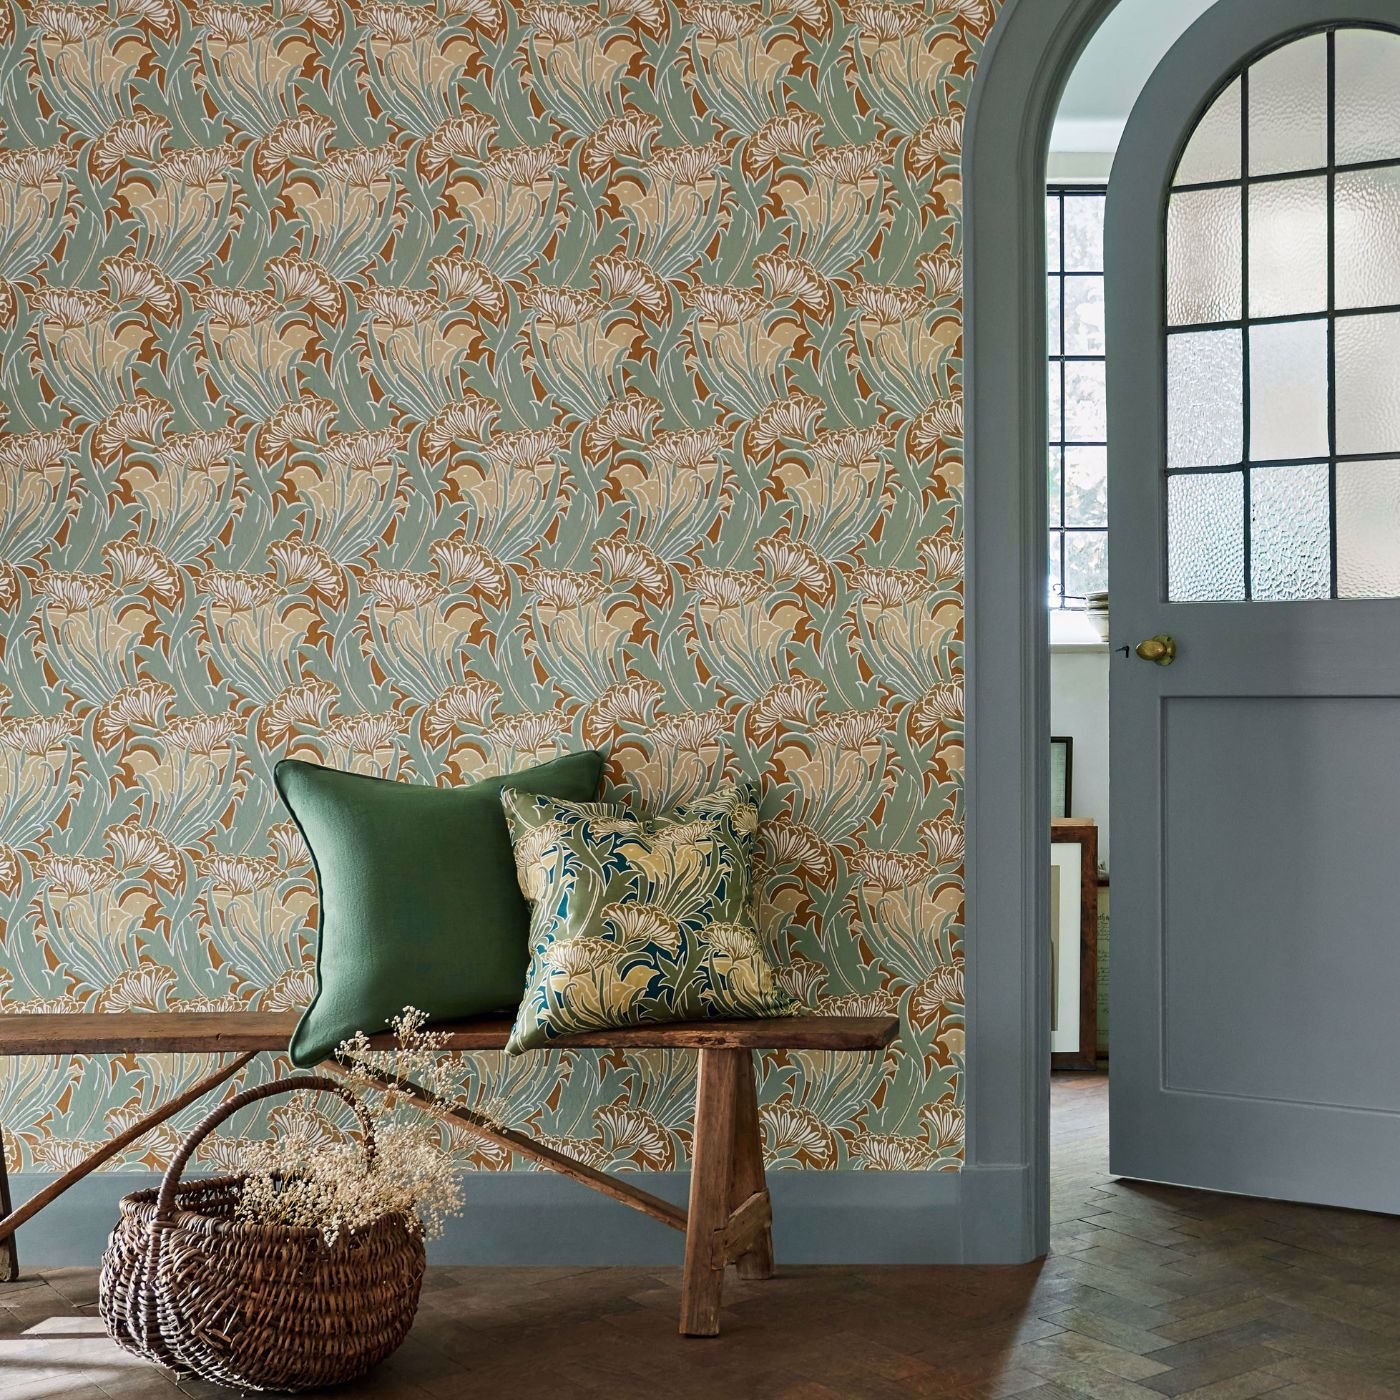 Laceflower is another stunning from the Bedford Park Morris and Co book. Beautiful color combos. #floralwallpaper #walldecor #morrisandco #classicwallpaper #wallpaperdecor